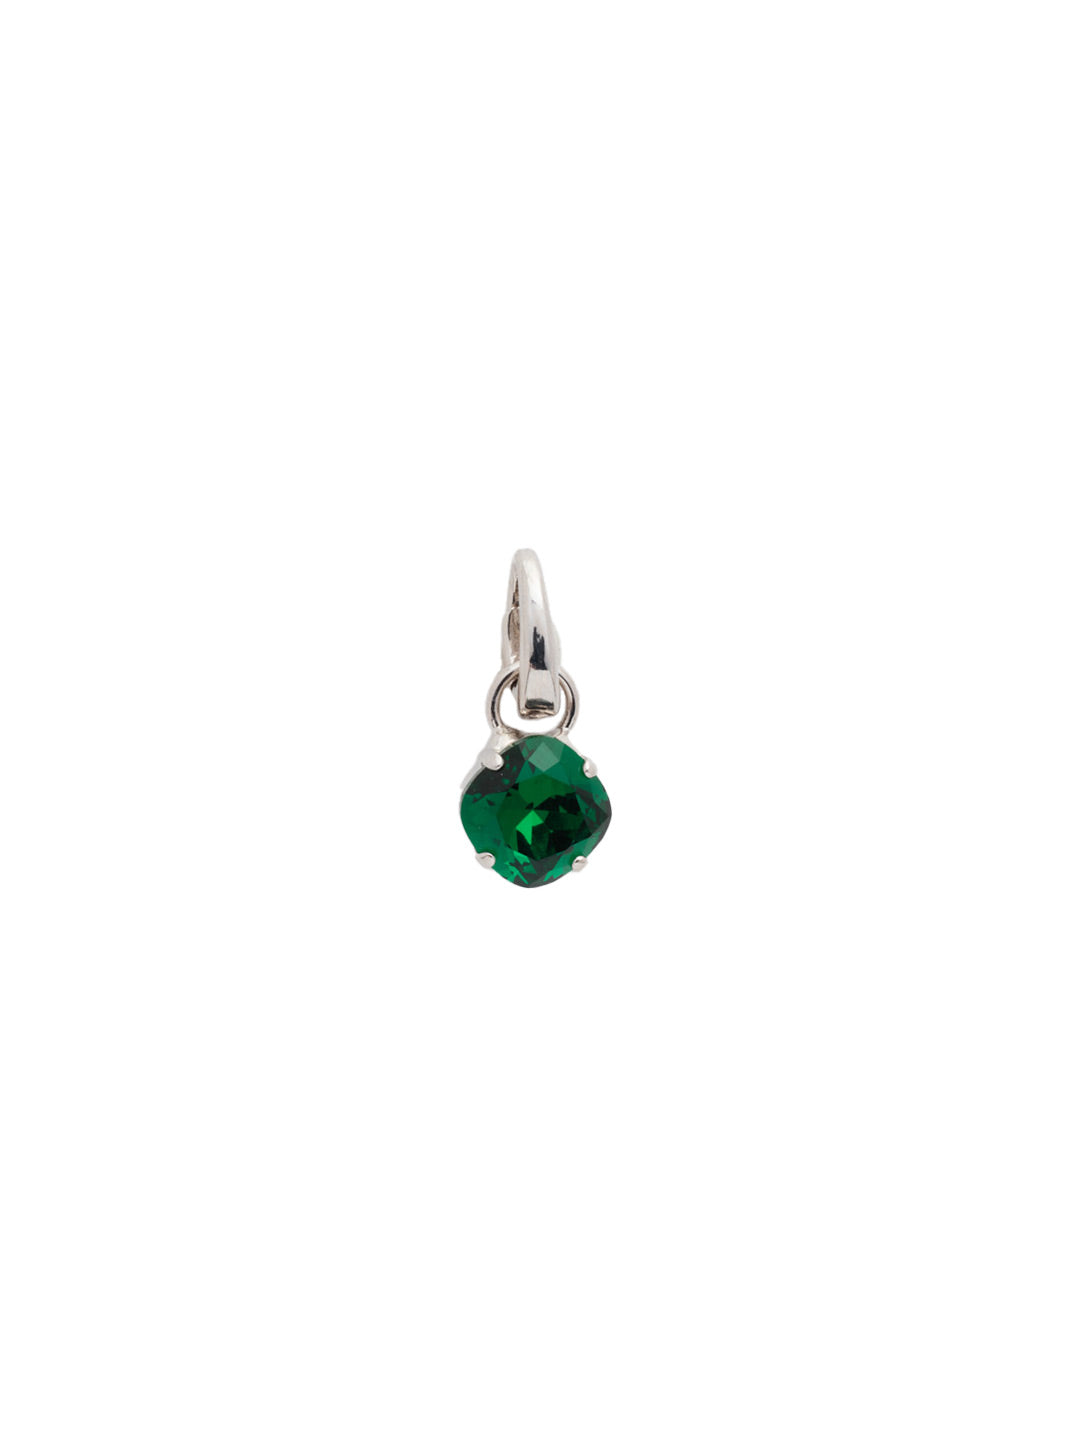 May Birthstone Emerald Charm - CEU1RHEME - <p>A cushion-cut crystal designed in your beautiful birthstone. Simply attach it to our favorite chain for an everyday look. From Sorrelli's Emerald collection in our Palladium Silver-tone finish.</p>